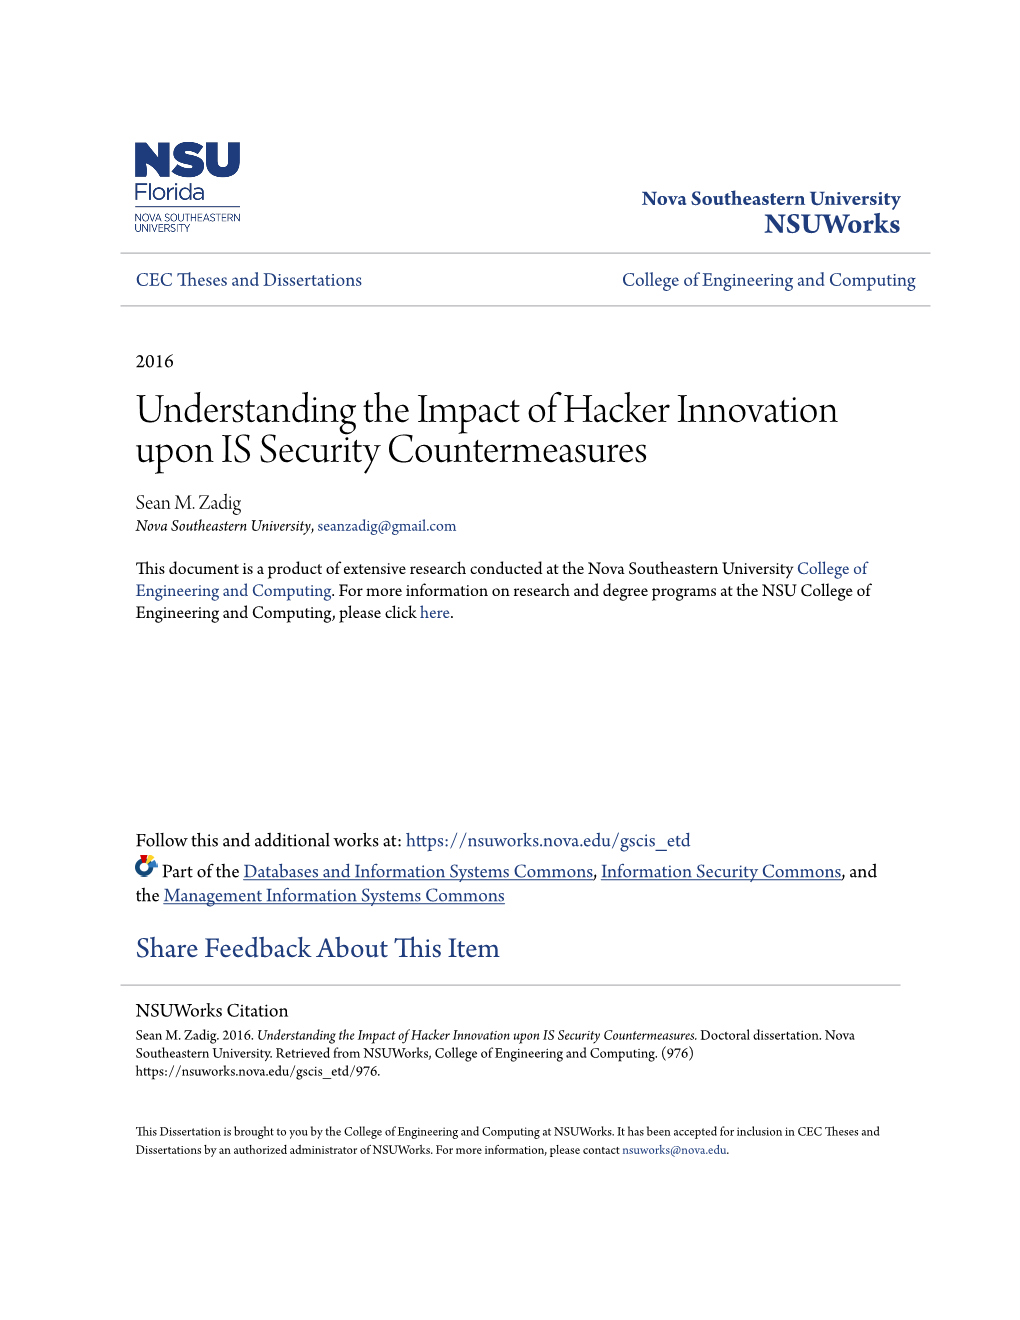 Understanding the Impact of Hacker Innovation Upon IS Security Countermeasures Sean M